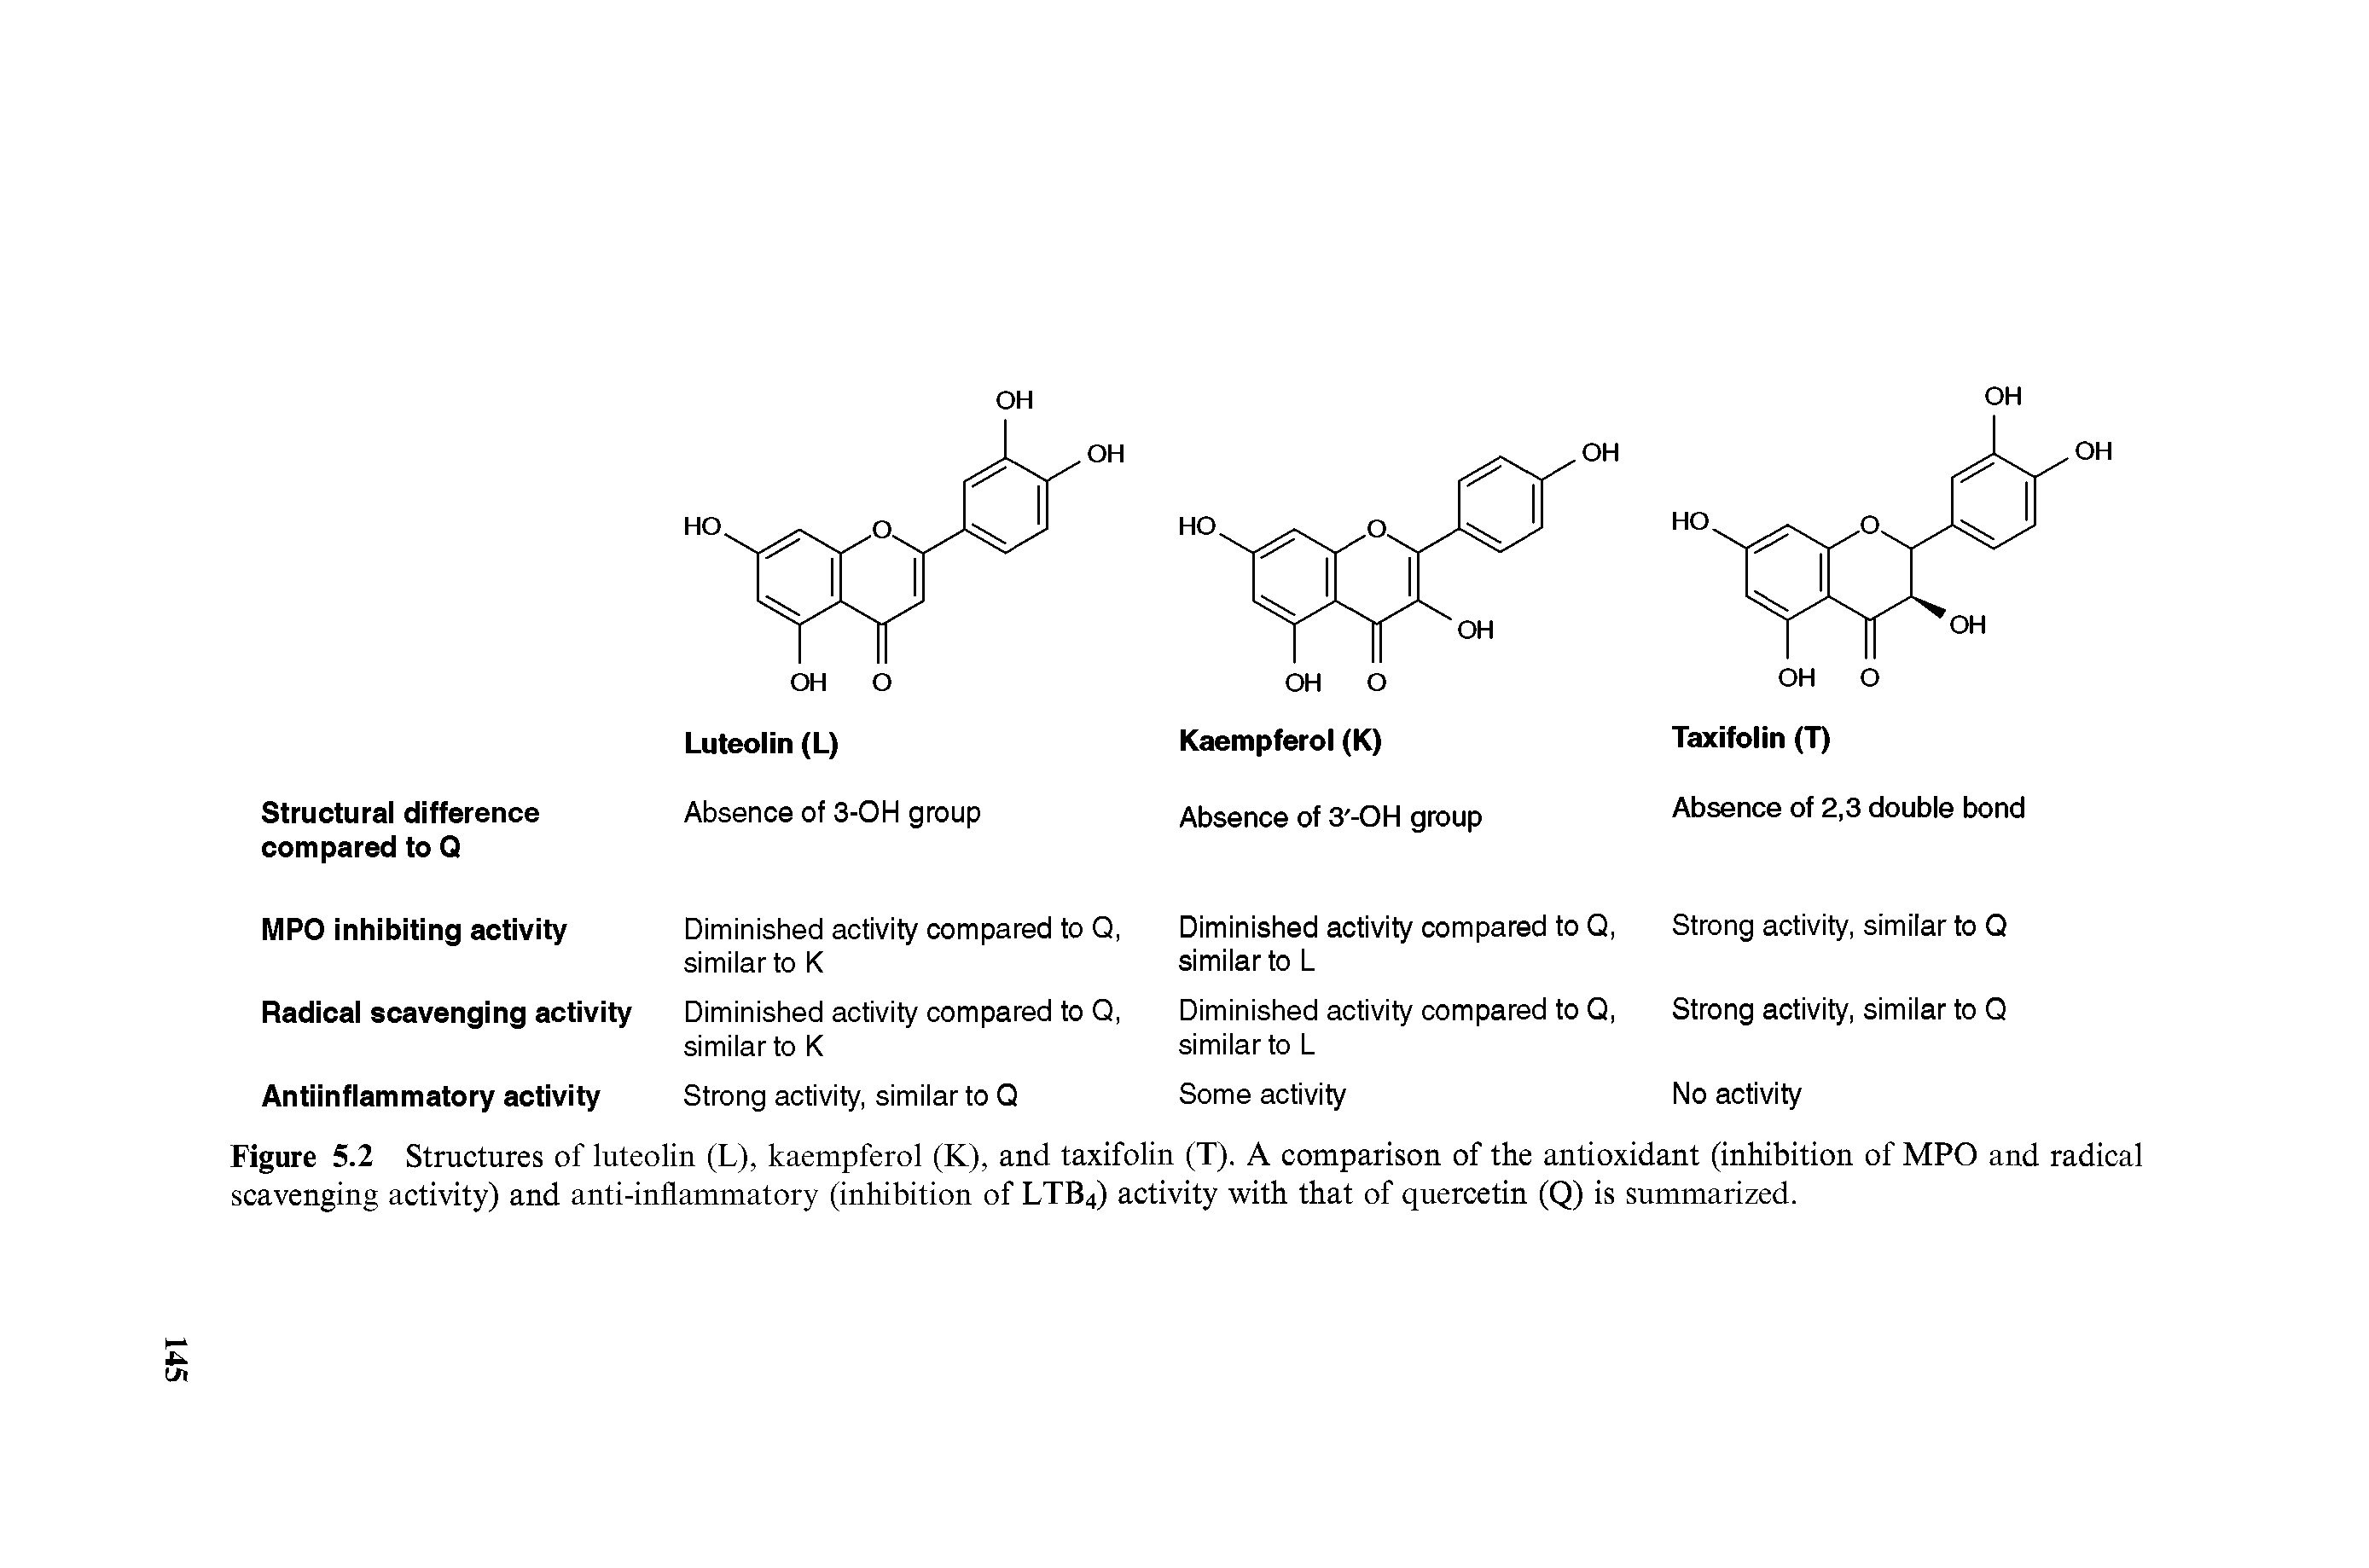 Figure 5.2 Structures of luteolin (L), kaempferol (K), and taxifolin (T). A comparison of the antioxidant (inhibition of MPO and radical scavenging activity) and anti-inflammatory (inhibition of LTB4) activity with that of quercetin (Q) is summarized.